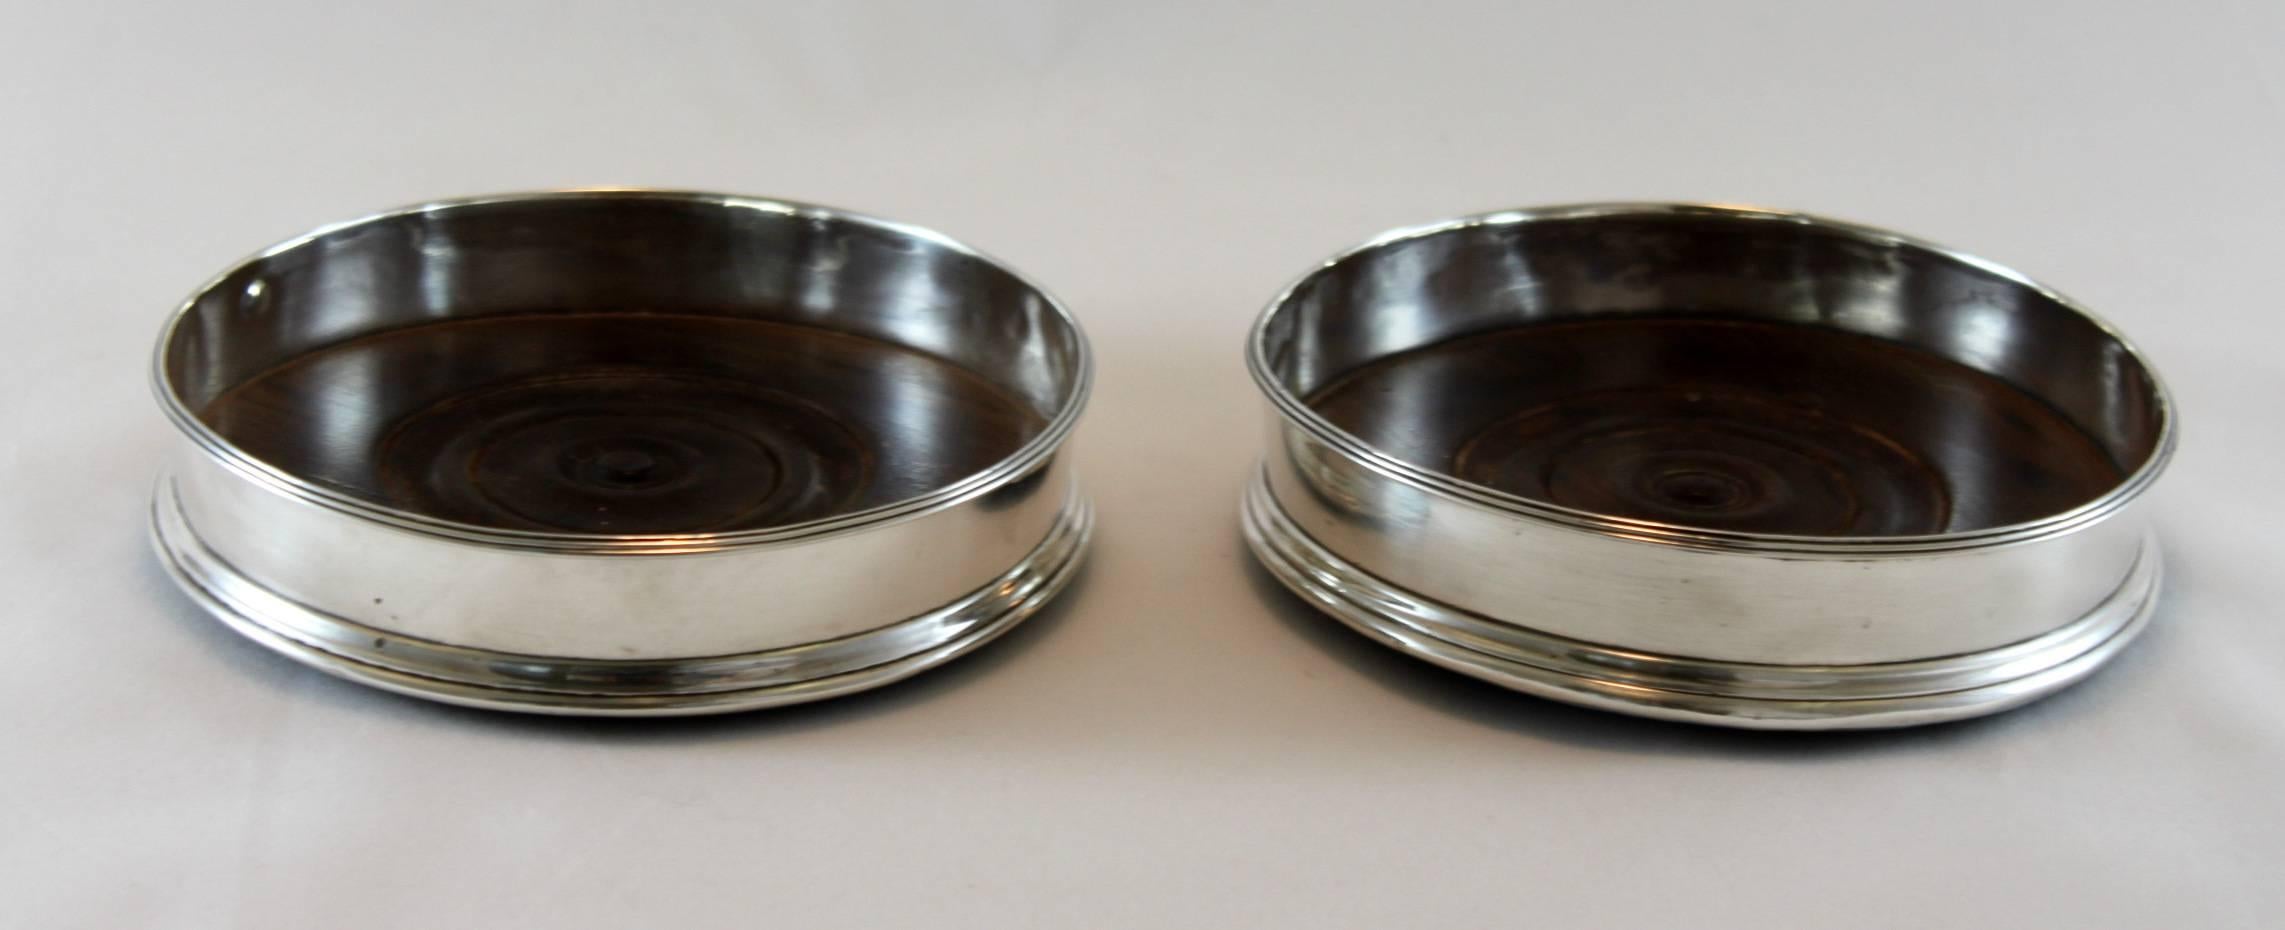 Antique Victorian sterling silver pair of wine coasters
Made in London 1868
Makers mark worn and unable to be read
Fully hallmarked with a box 

Dimensions - 
Diameter x height 12.1 x 2.8 cm
Total weight: 312 grams total

Condition: